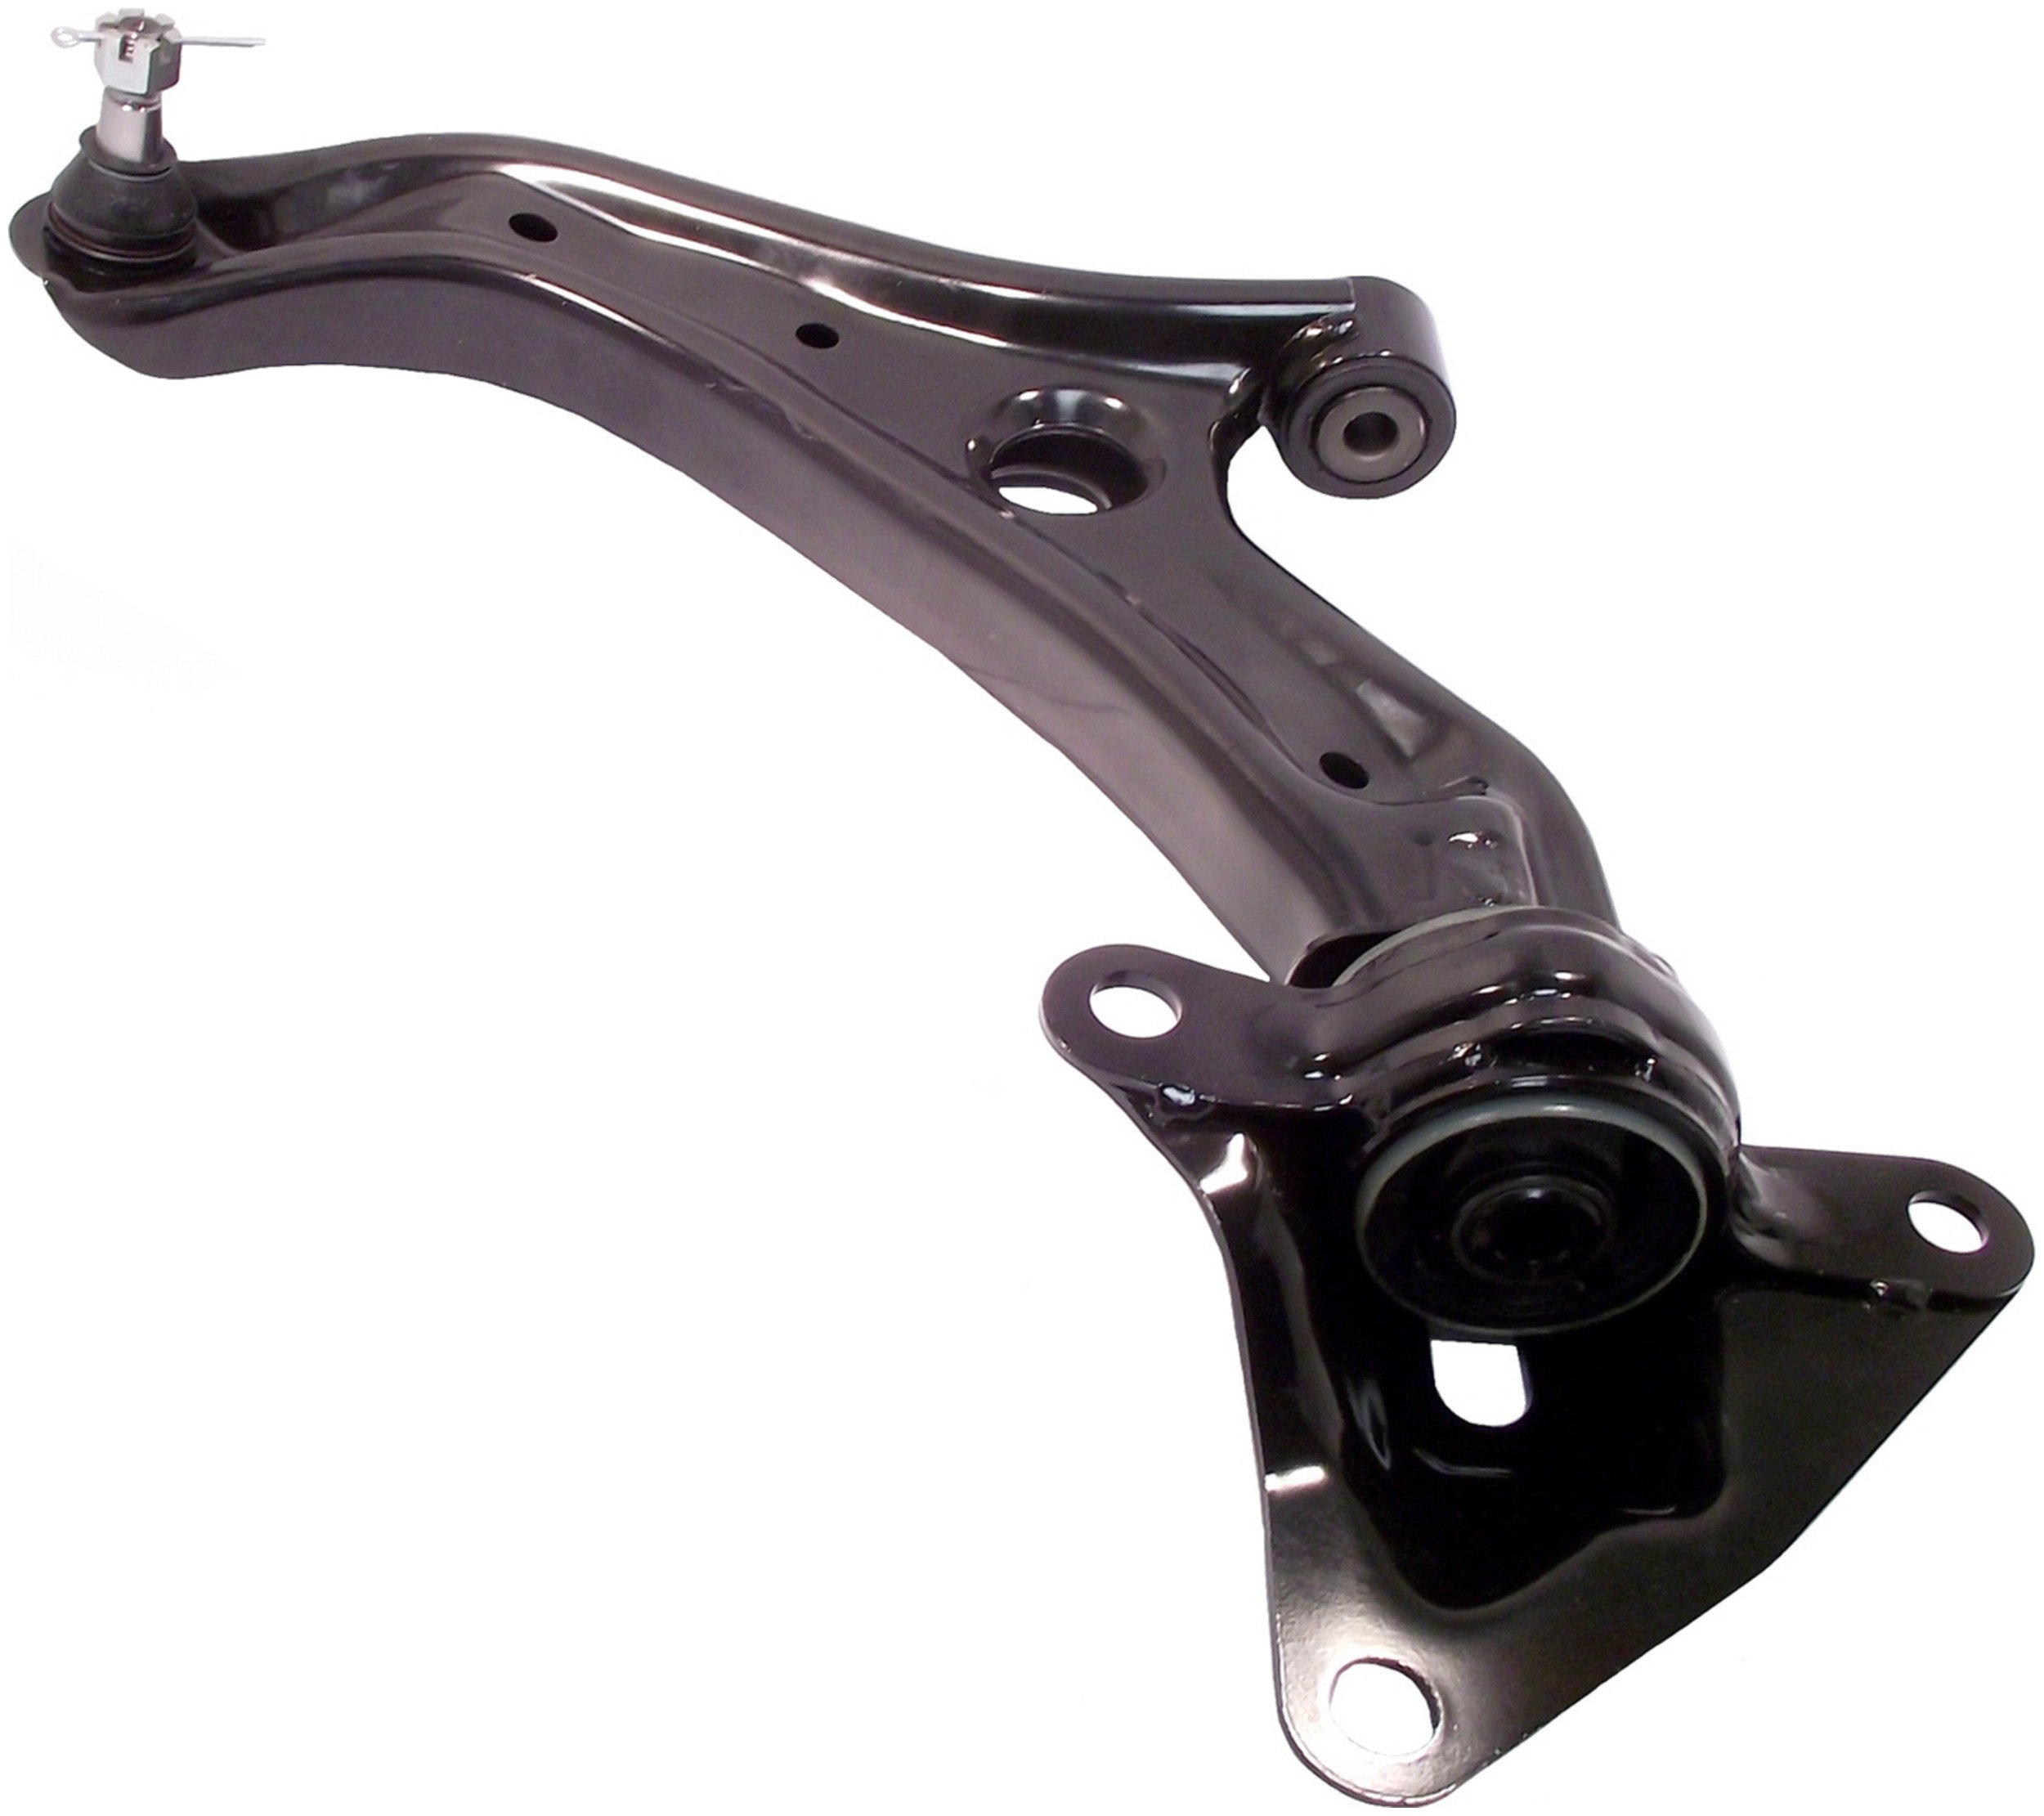 Suspension Control Arm and Ball Joint Assembly Front Right Lower fits Insight